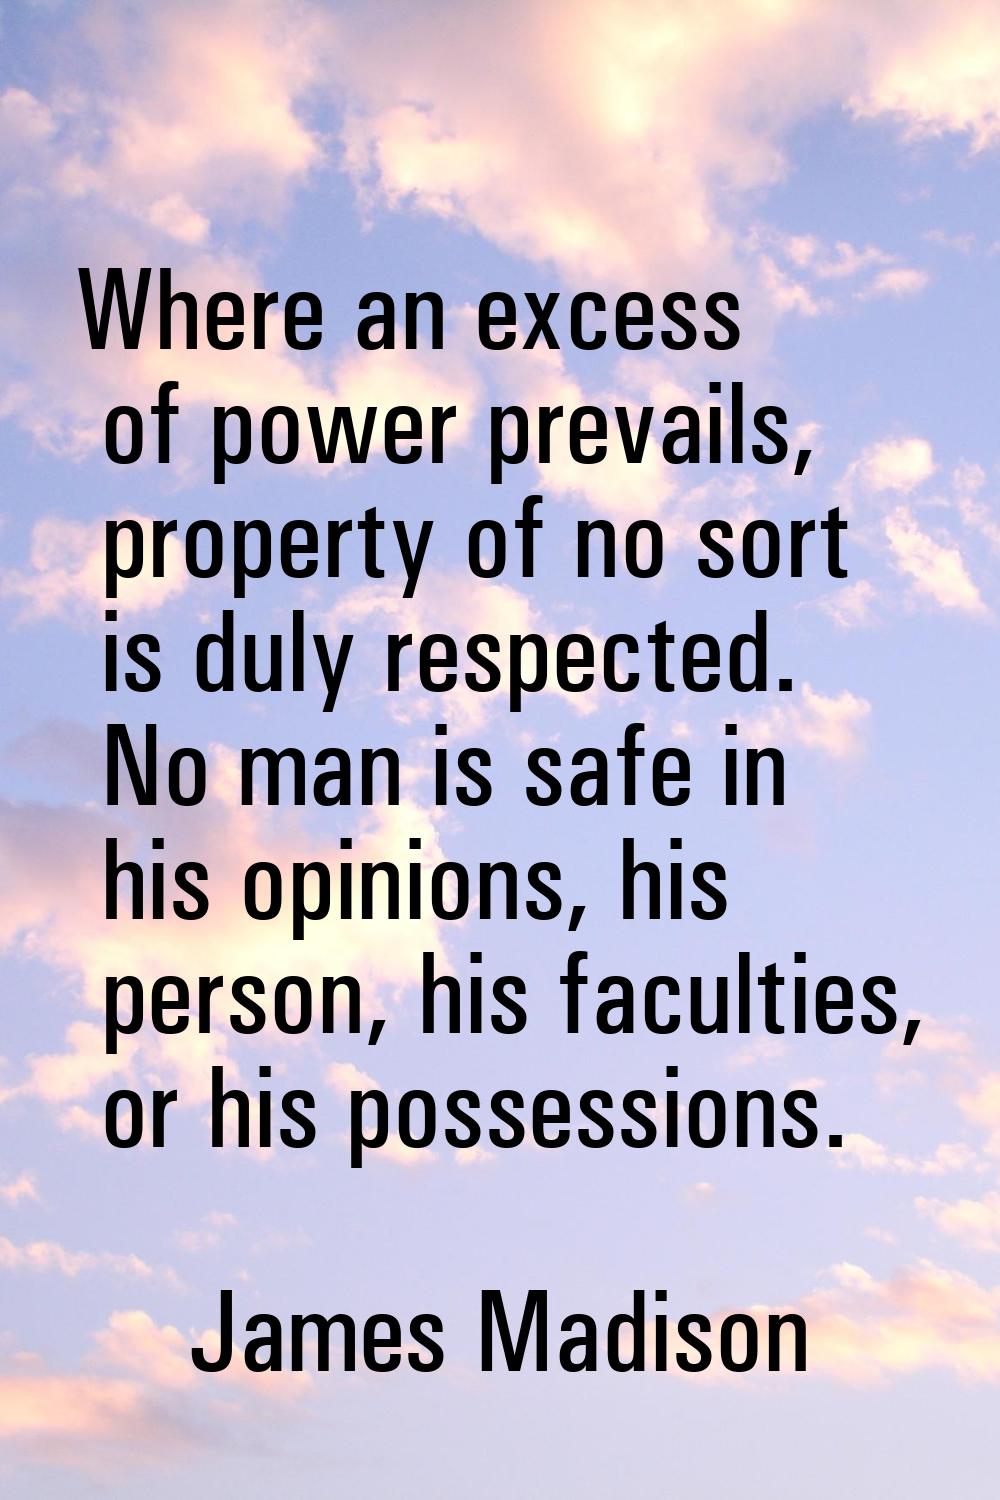 Where an excess of power prevails, property of no sort is duly respected. No man is safe in his opi